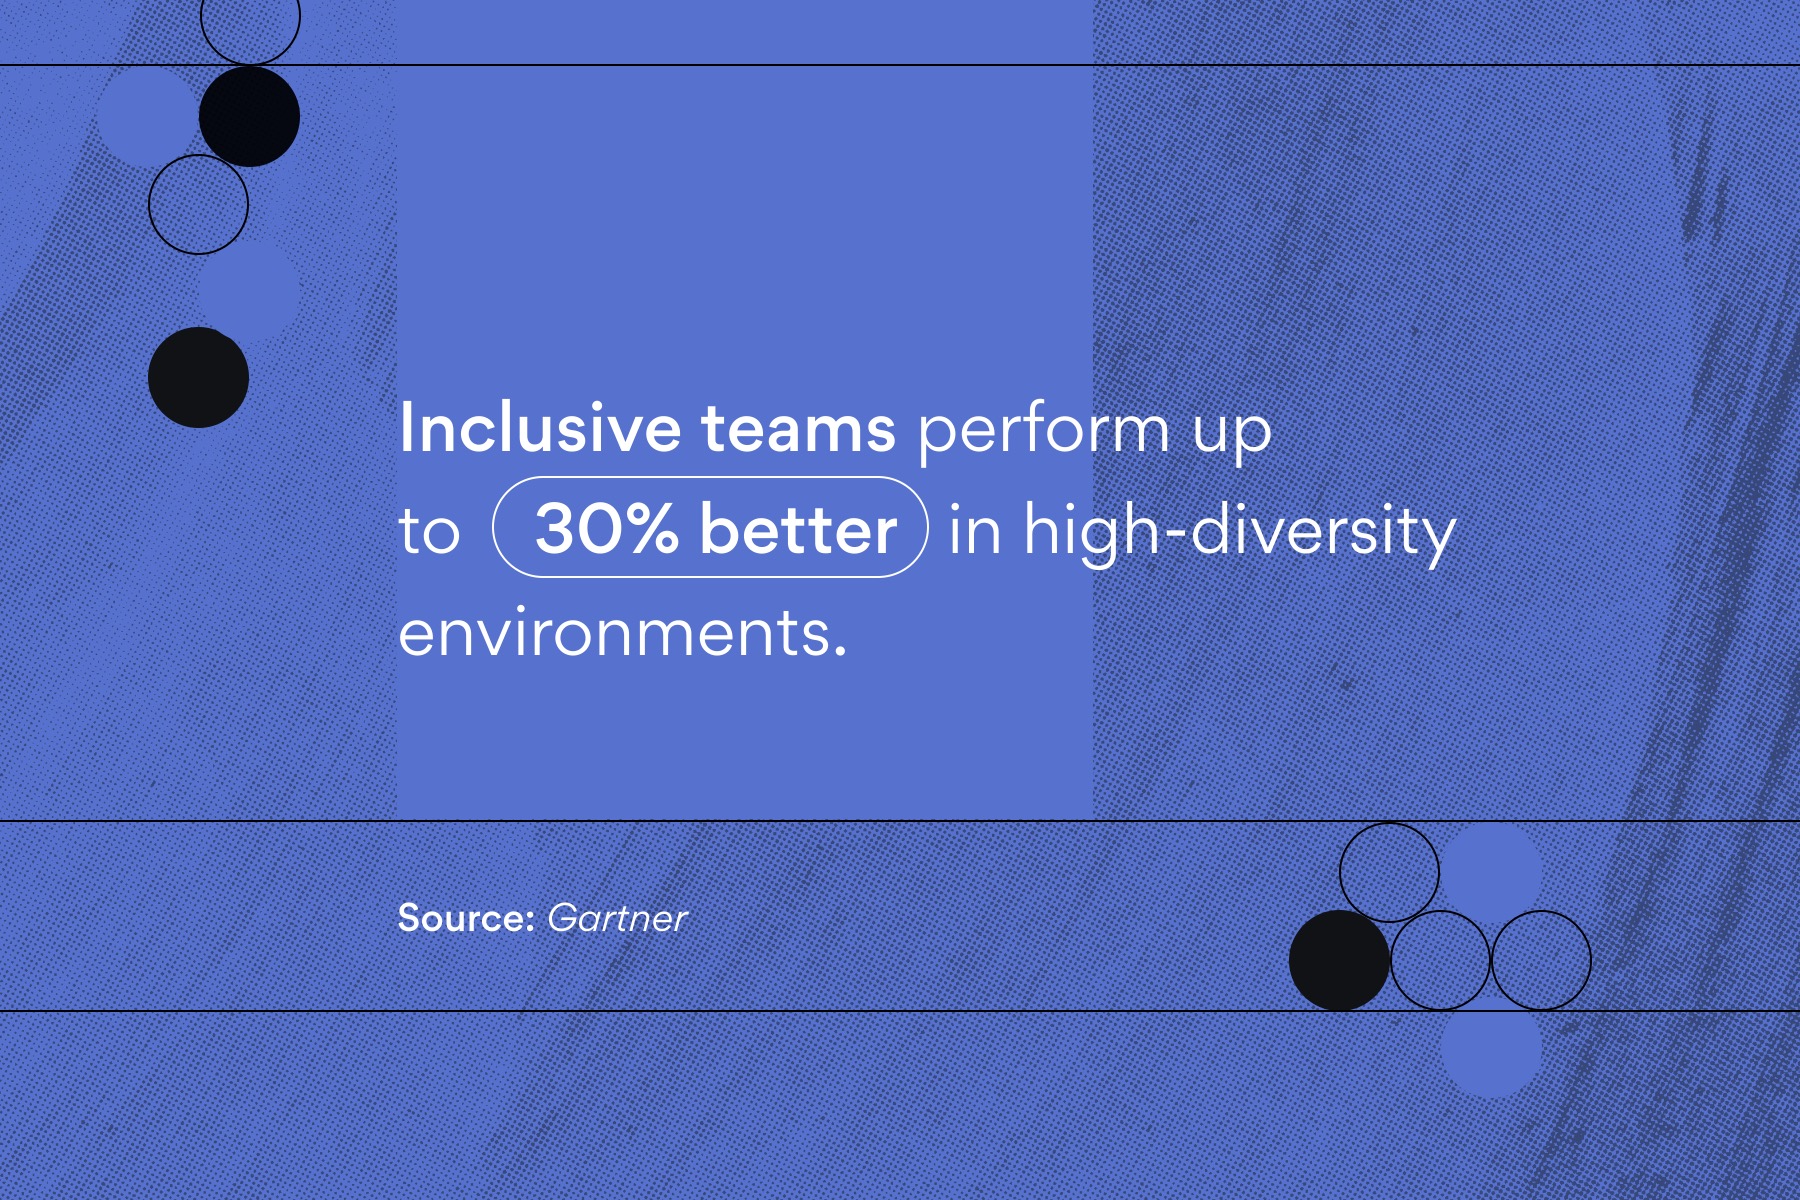 Illustration with the words "Inclusive teams perform up to 30% better in high-diversity environments.